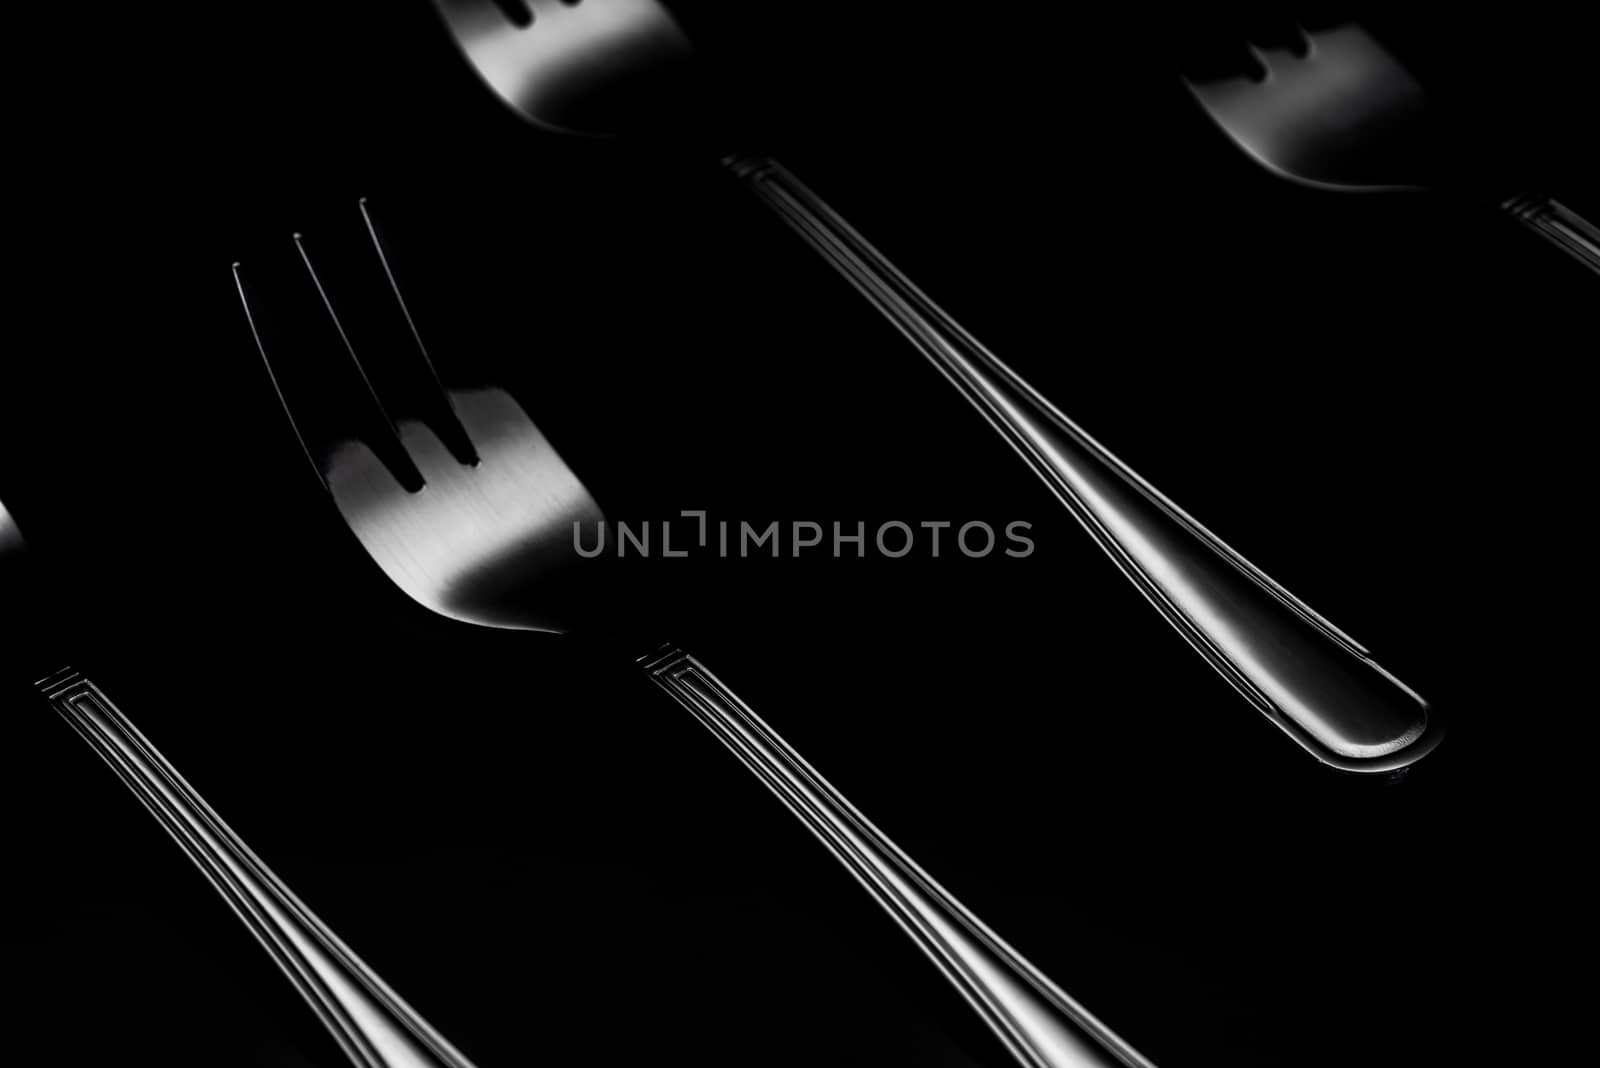 Steel or Silver Forks in Patter. Low Key Dark Image with Shiny F by merc67